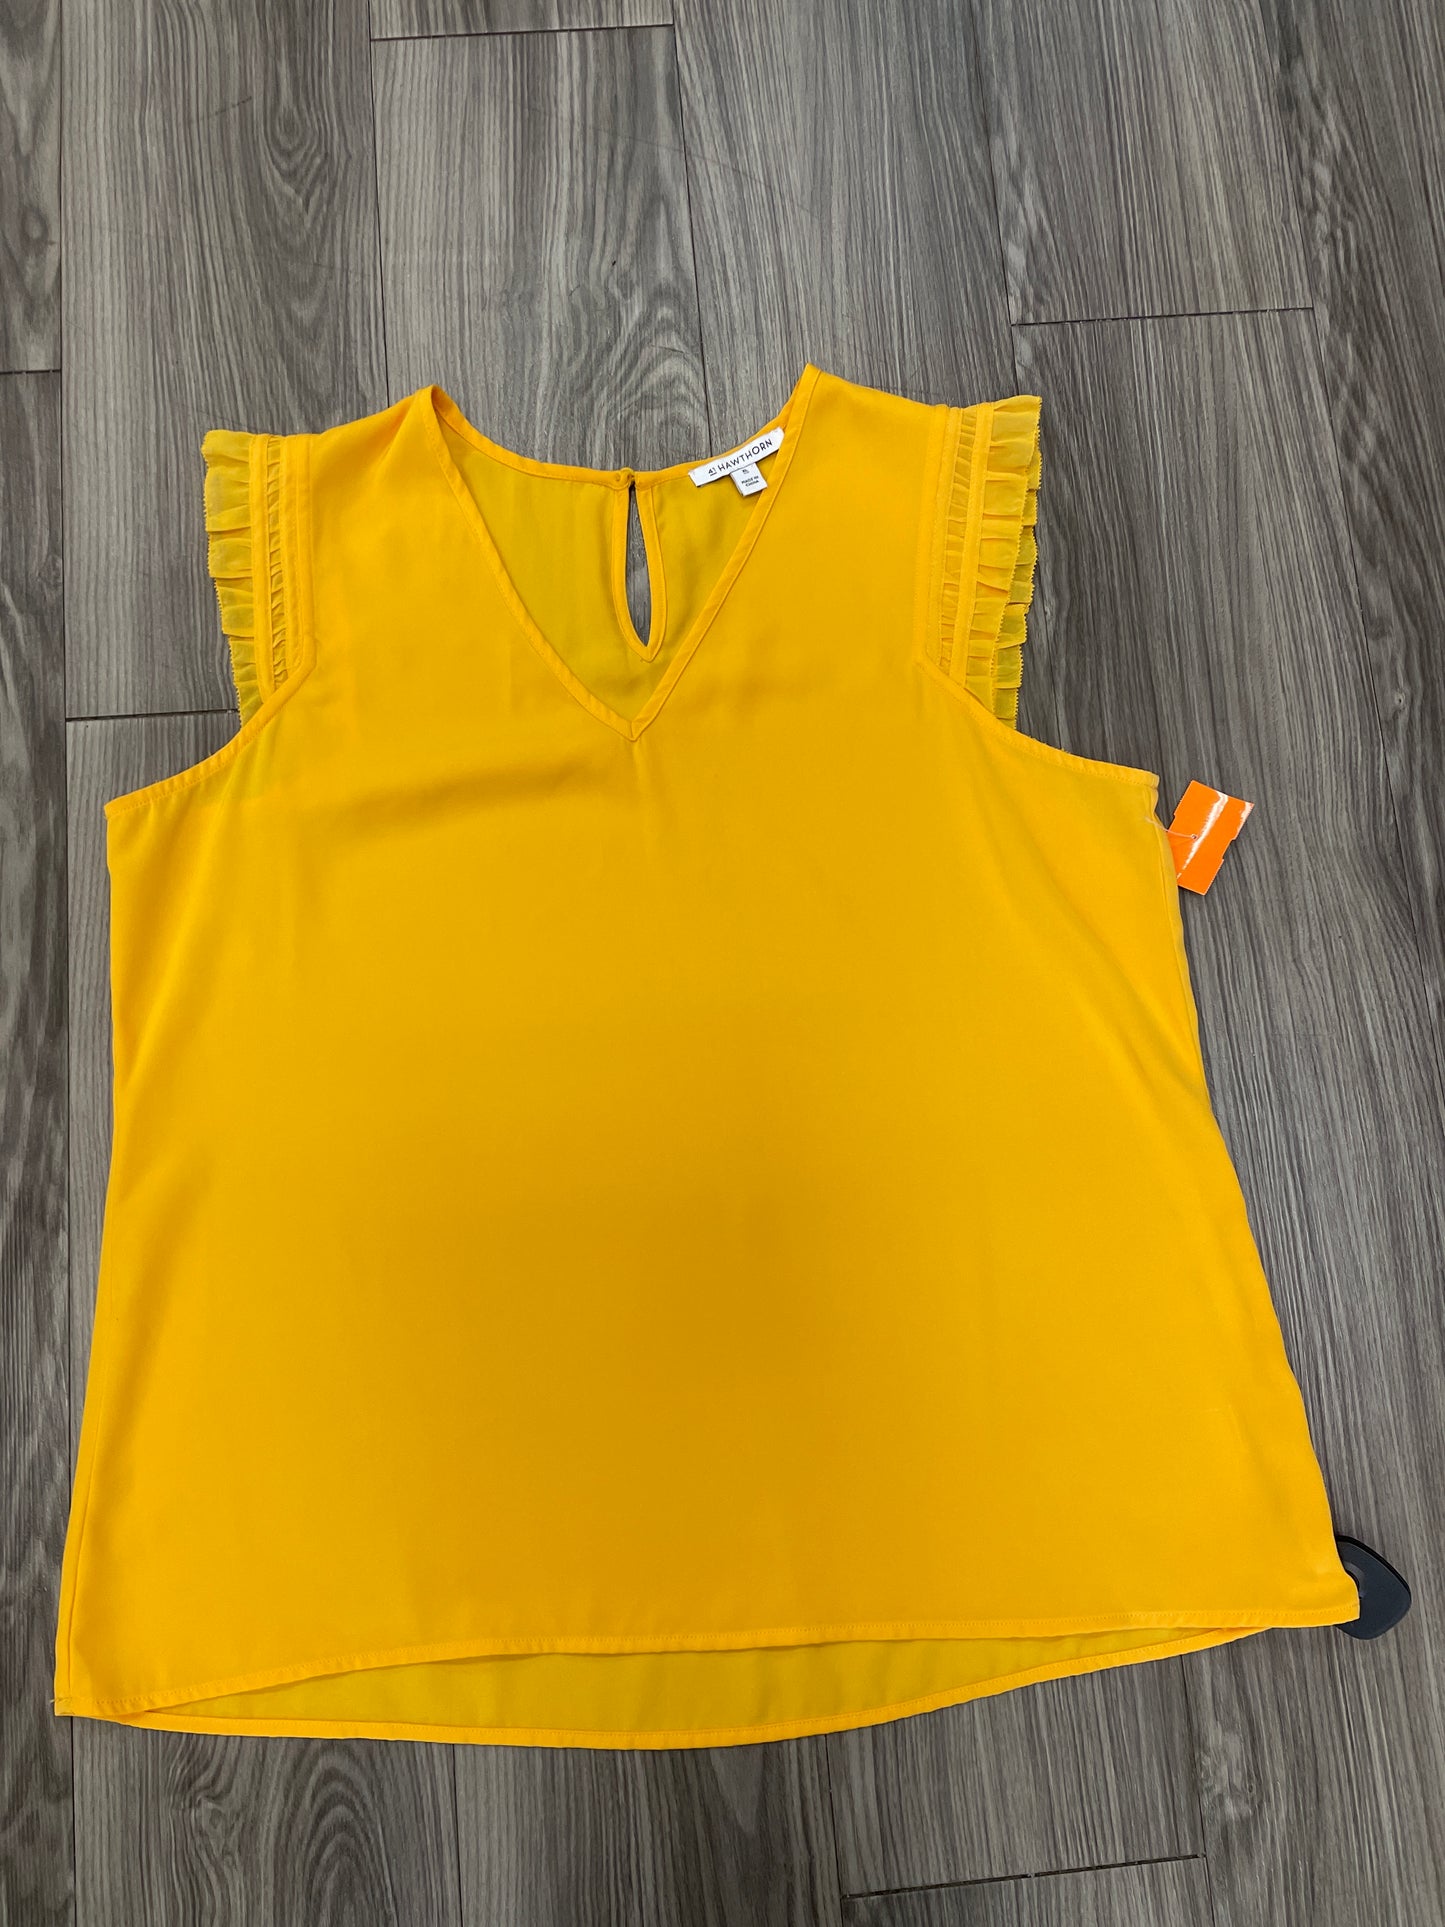 Tank Top By Hawthorn  Size: Xl